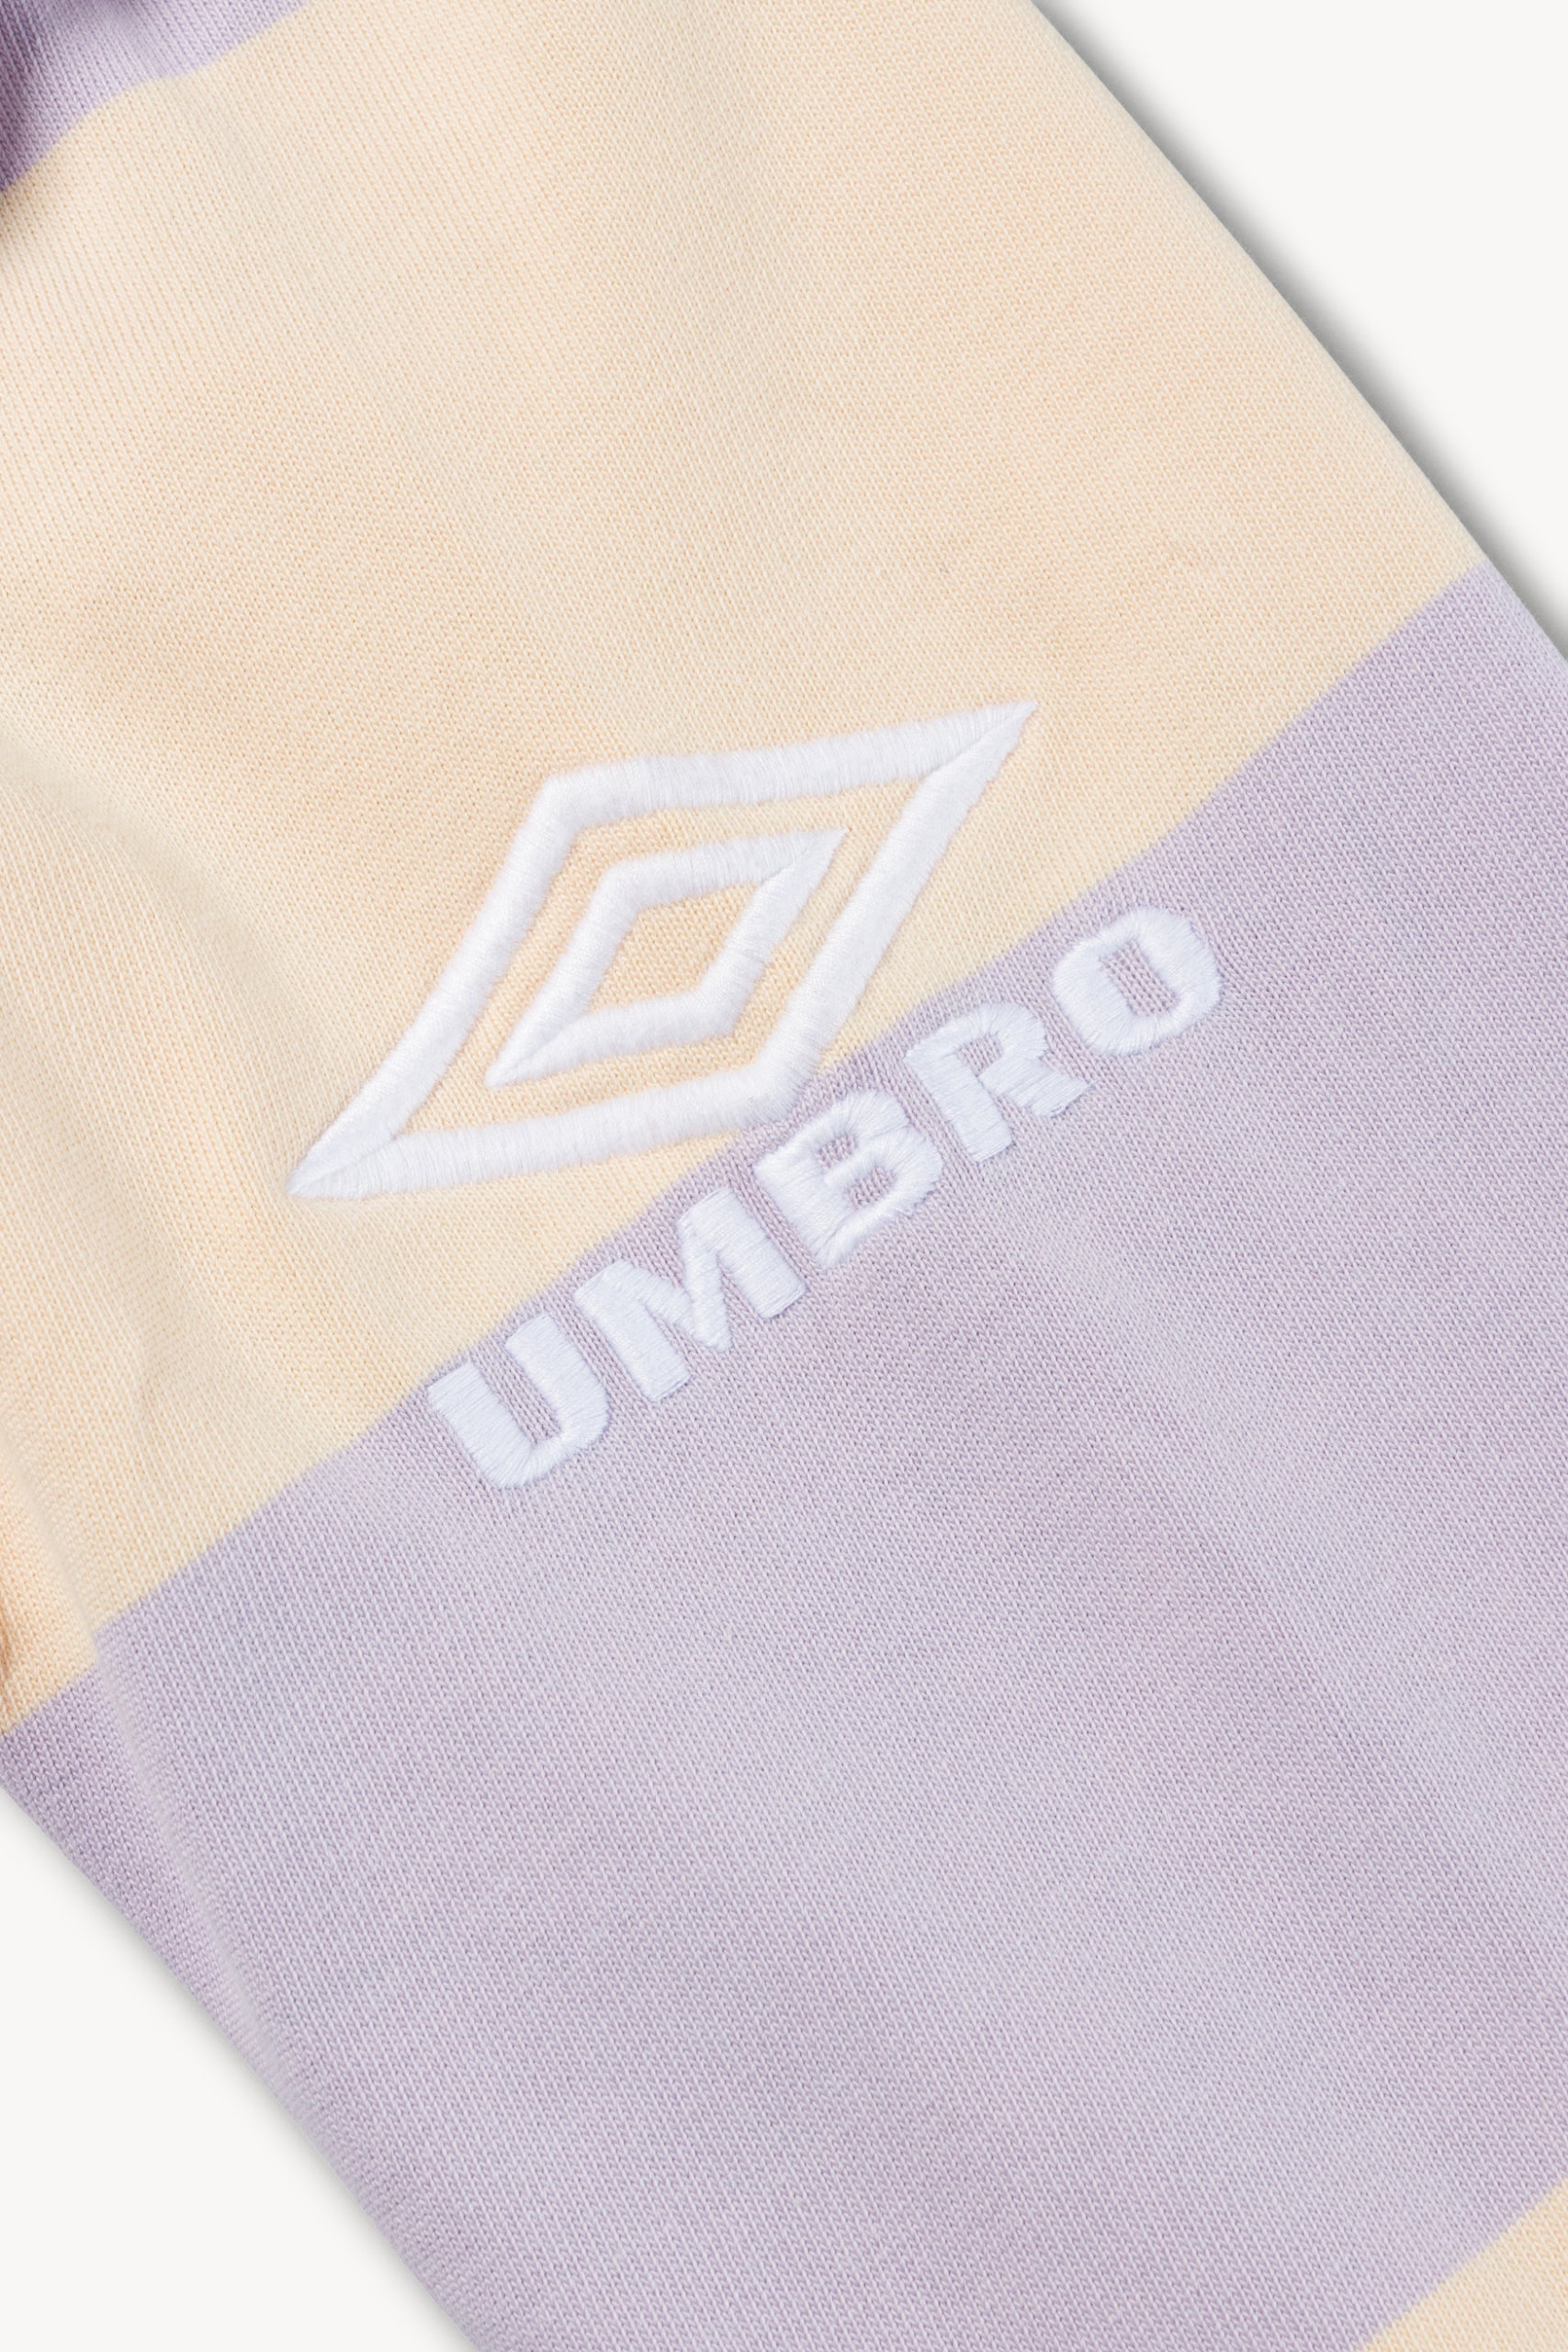 Load image into Gallery viewer, Aries x Umbro Inked Rugby Shirt